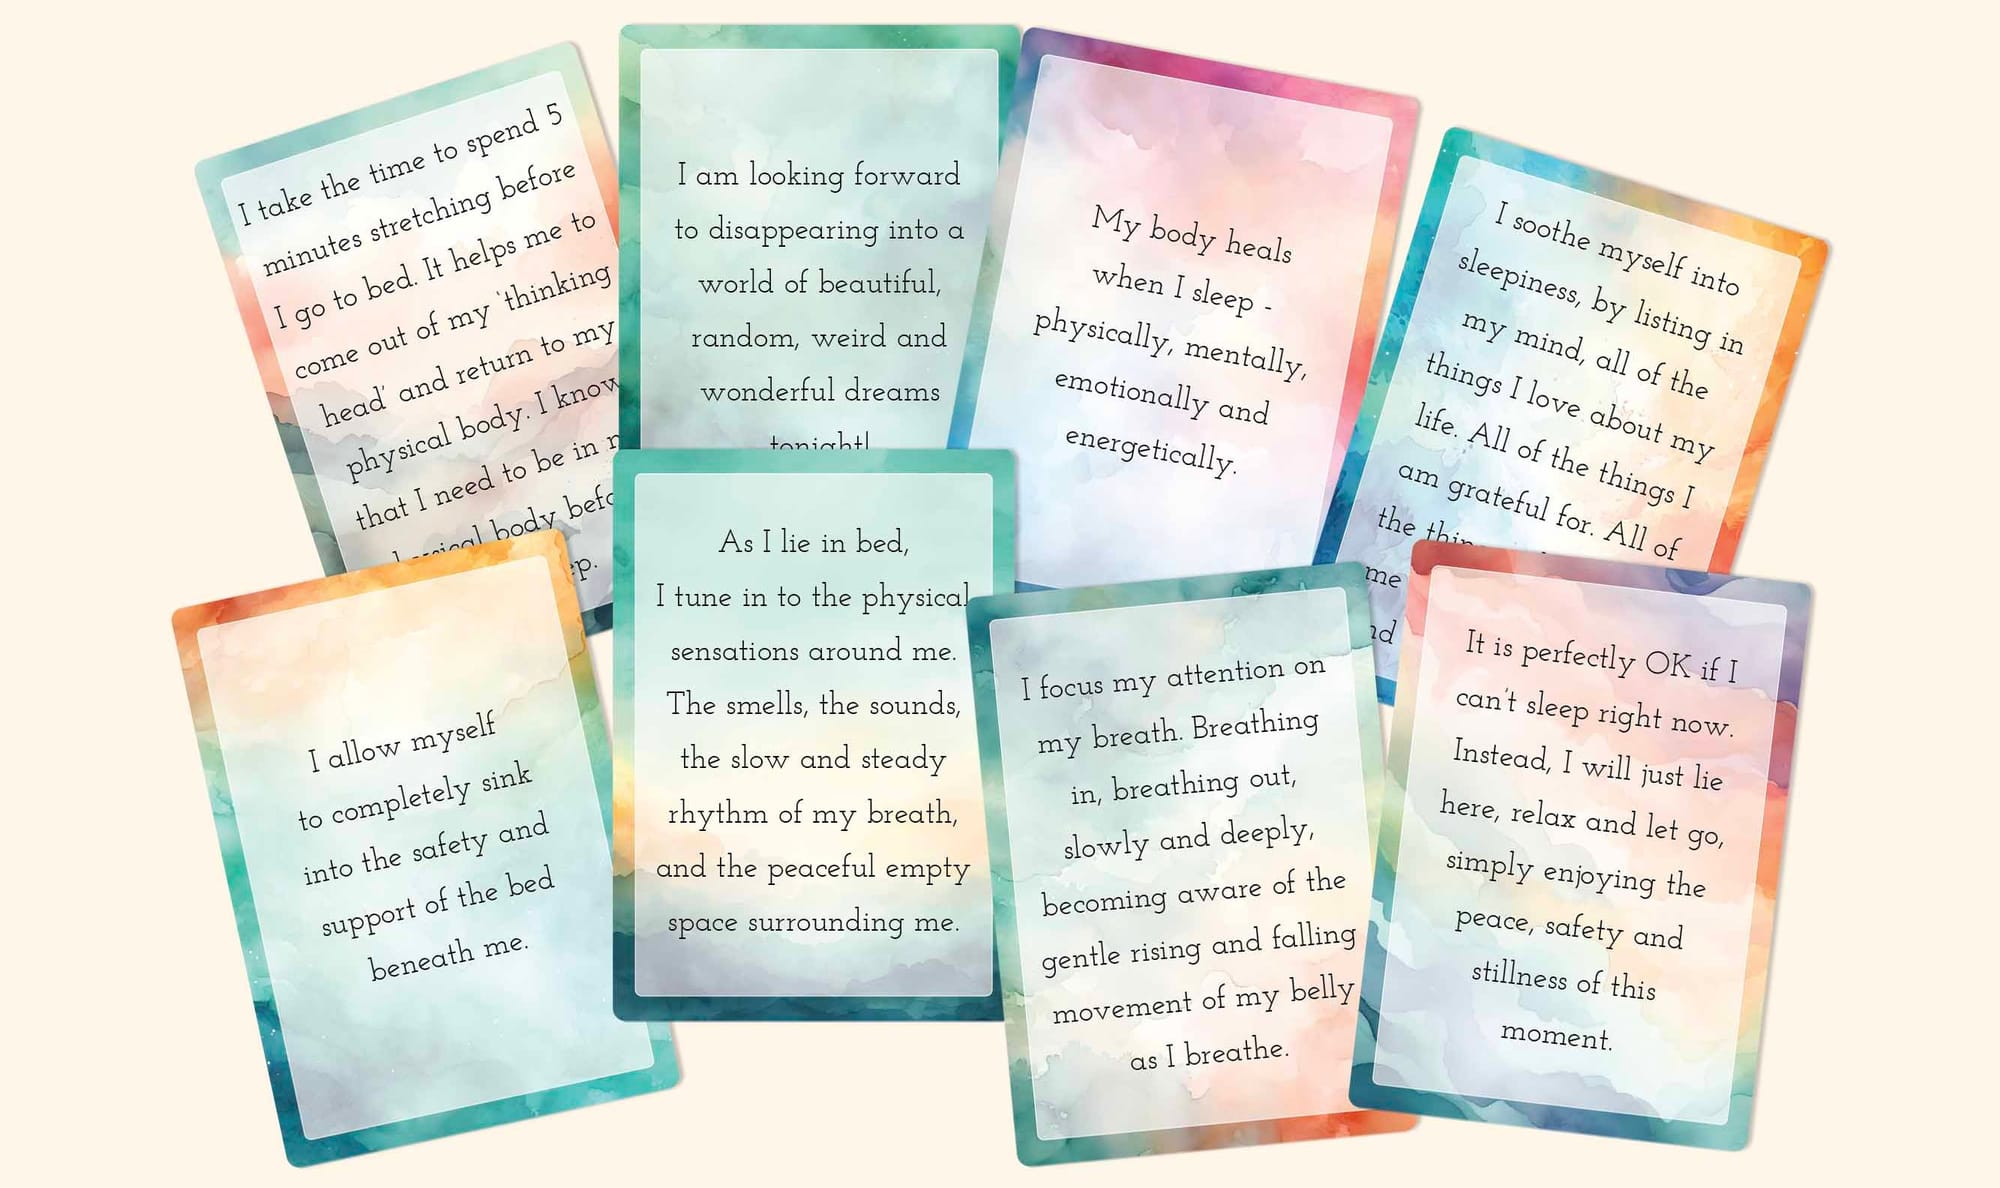 23 printable positive affirmation cards for getting a great night of sleep.